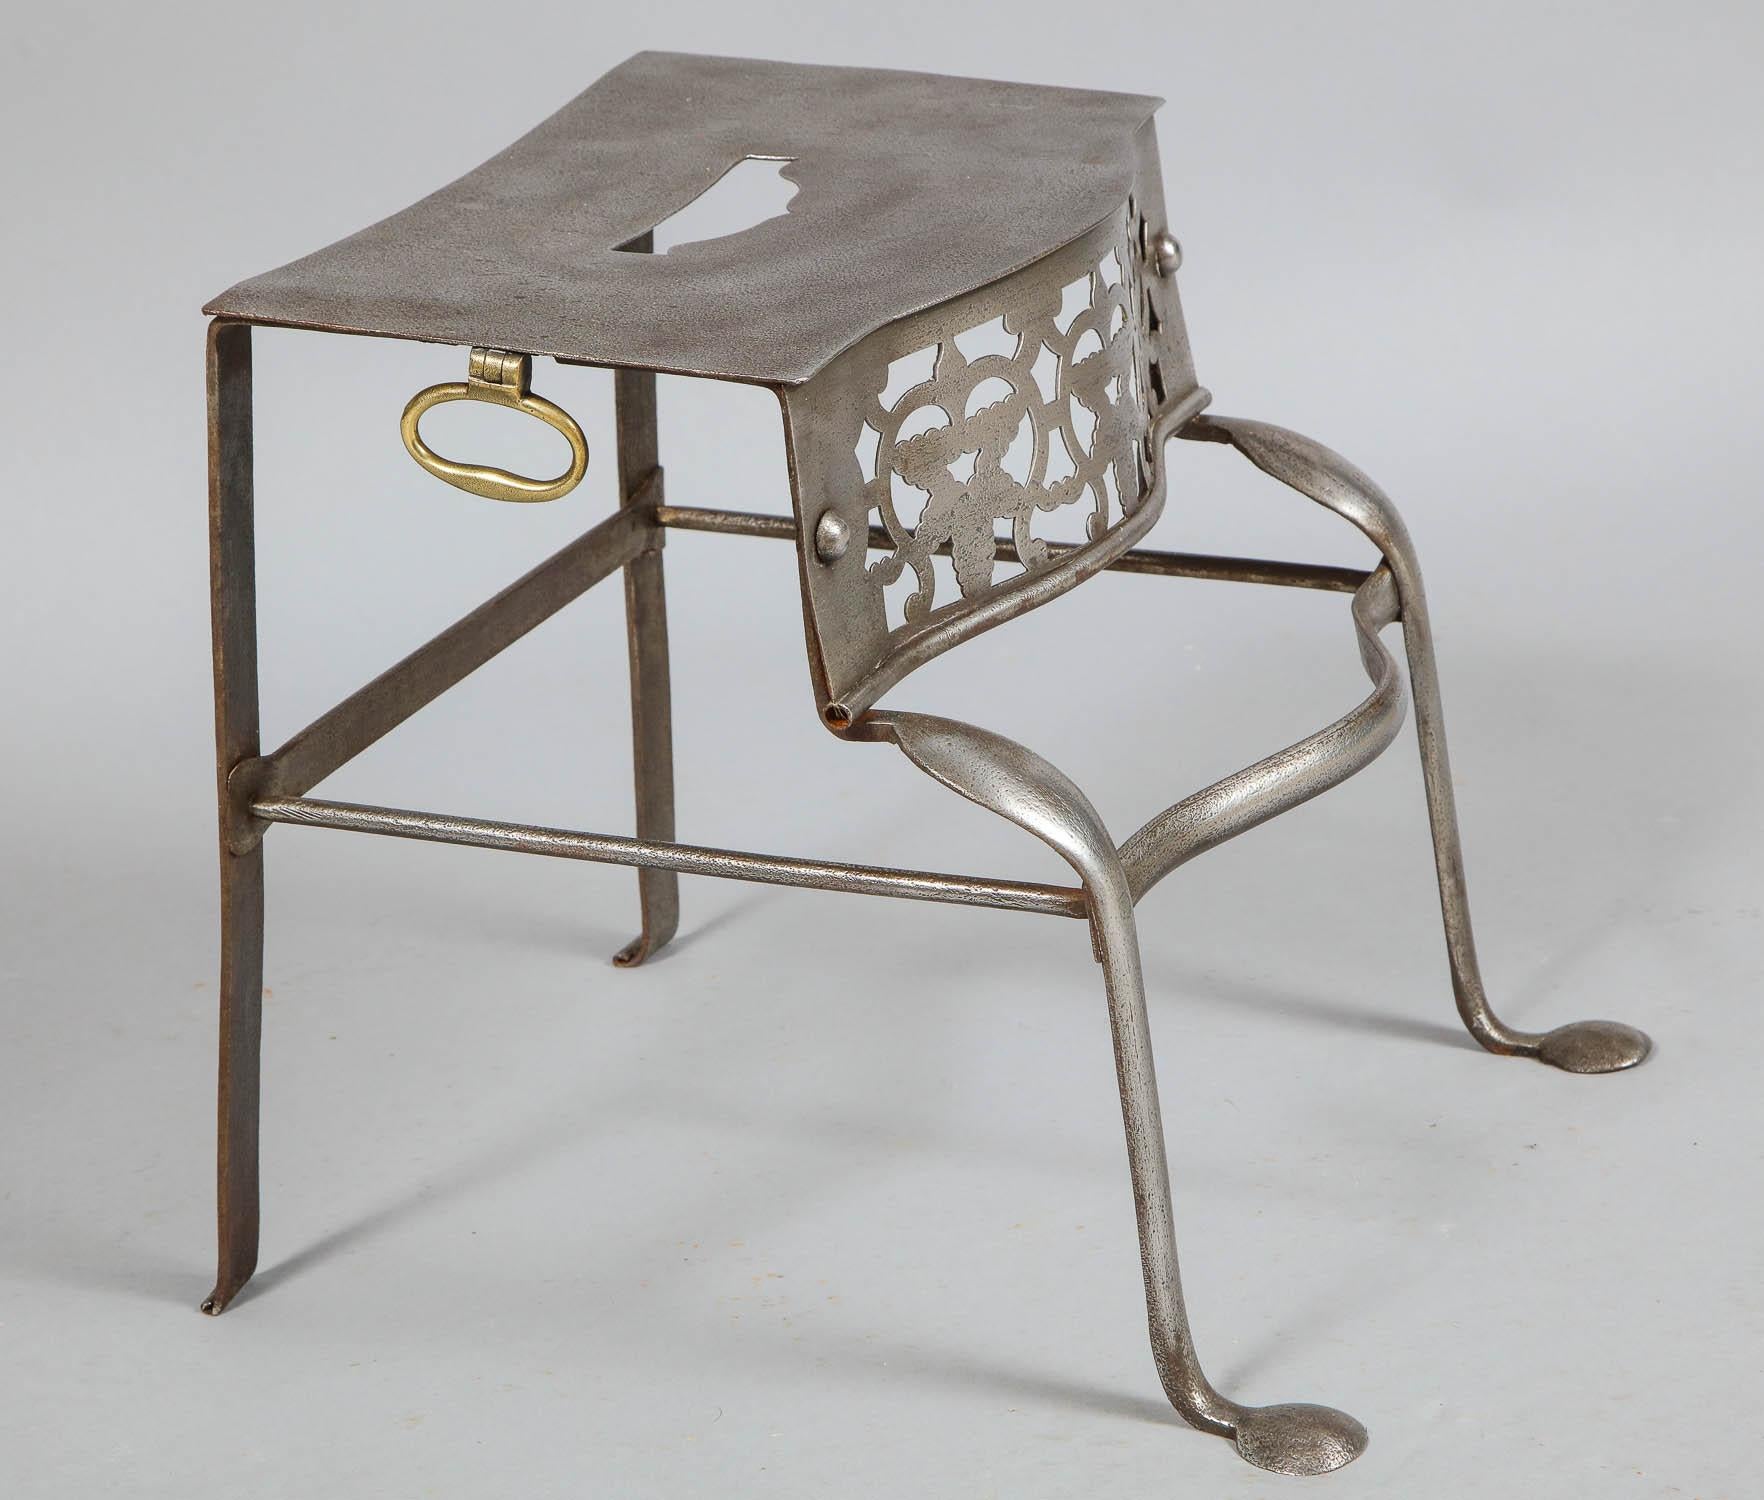 Fine George III period steel trivet having pierced top and frieze and having brass handles over gunmetal steel base, the front cabriole legs ending in penny feet.



